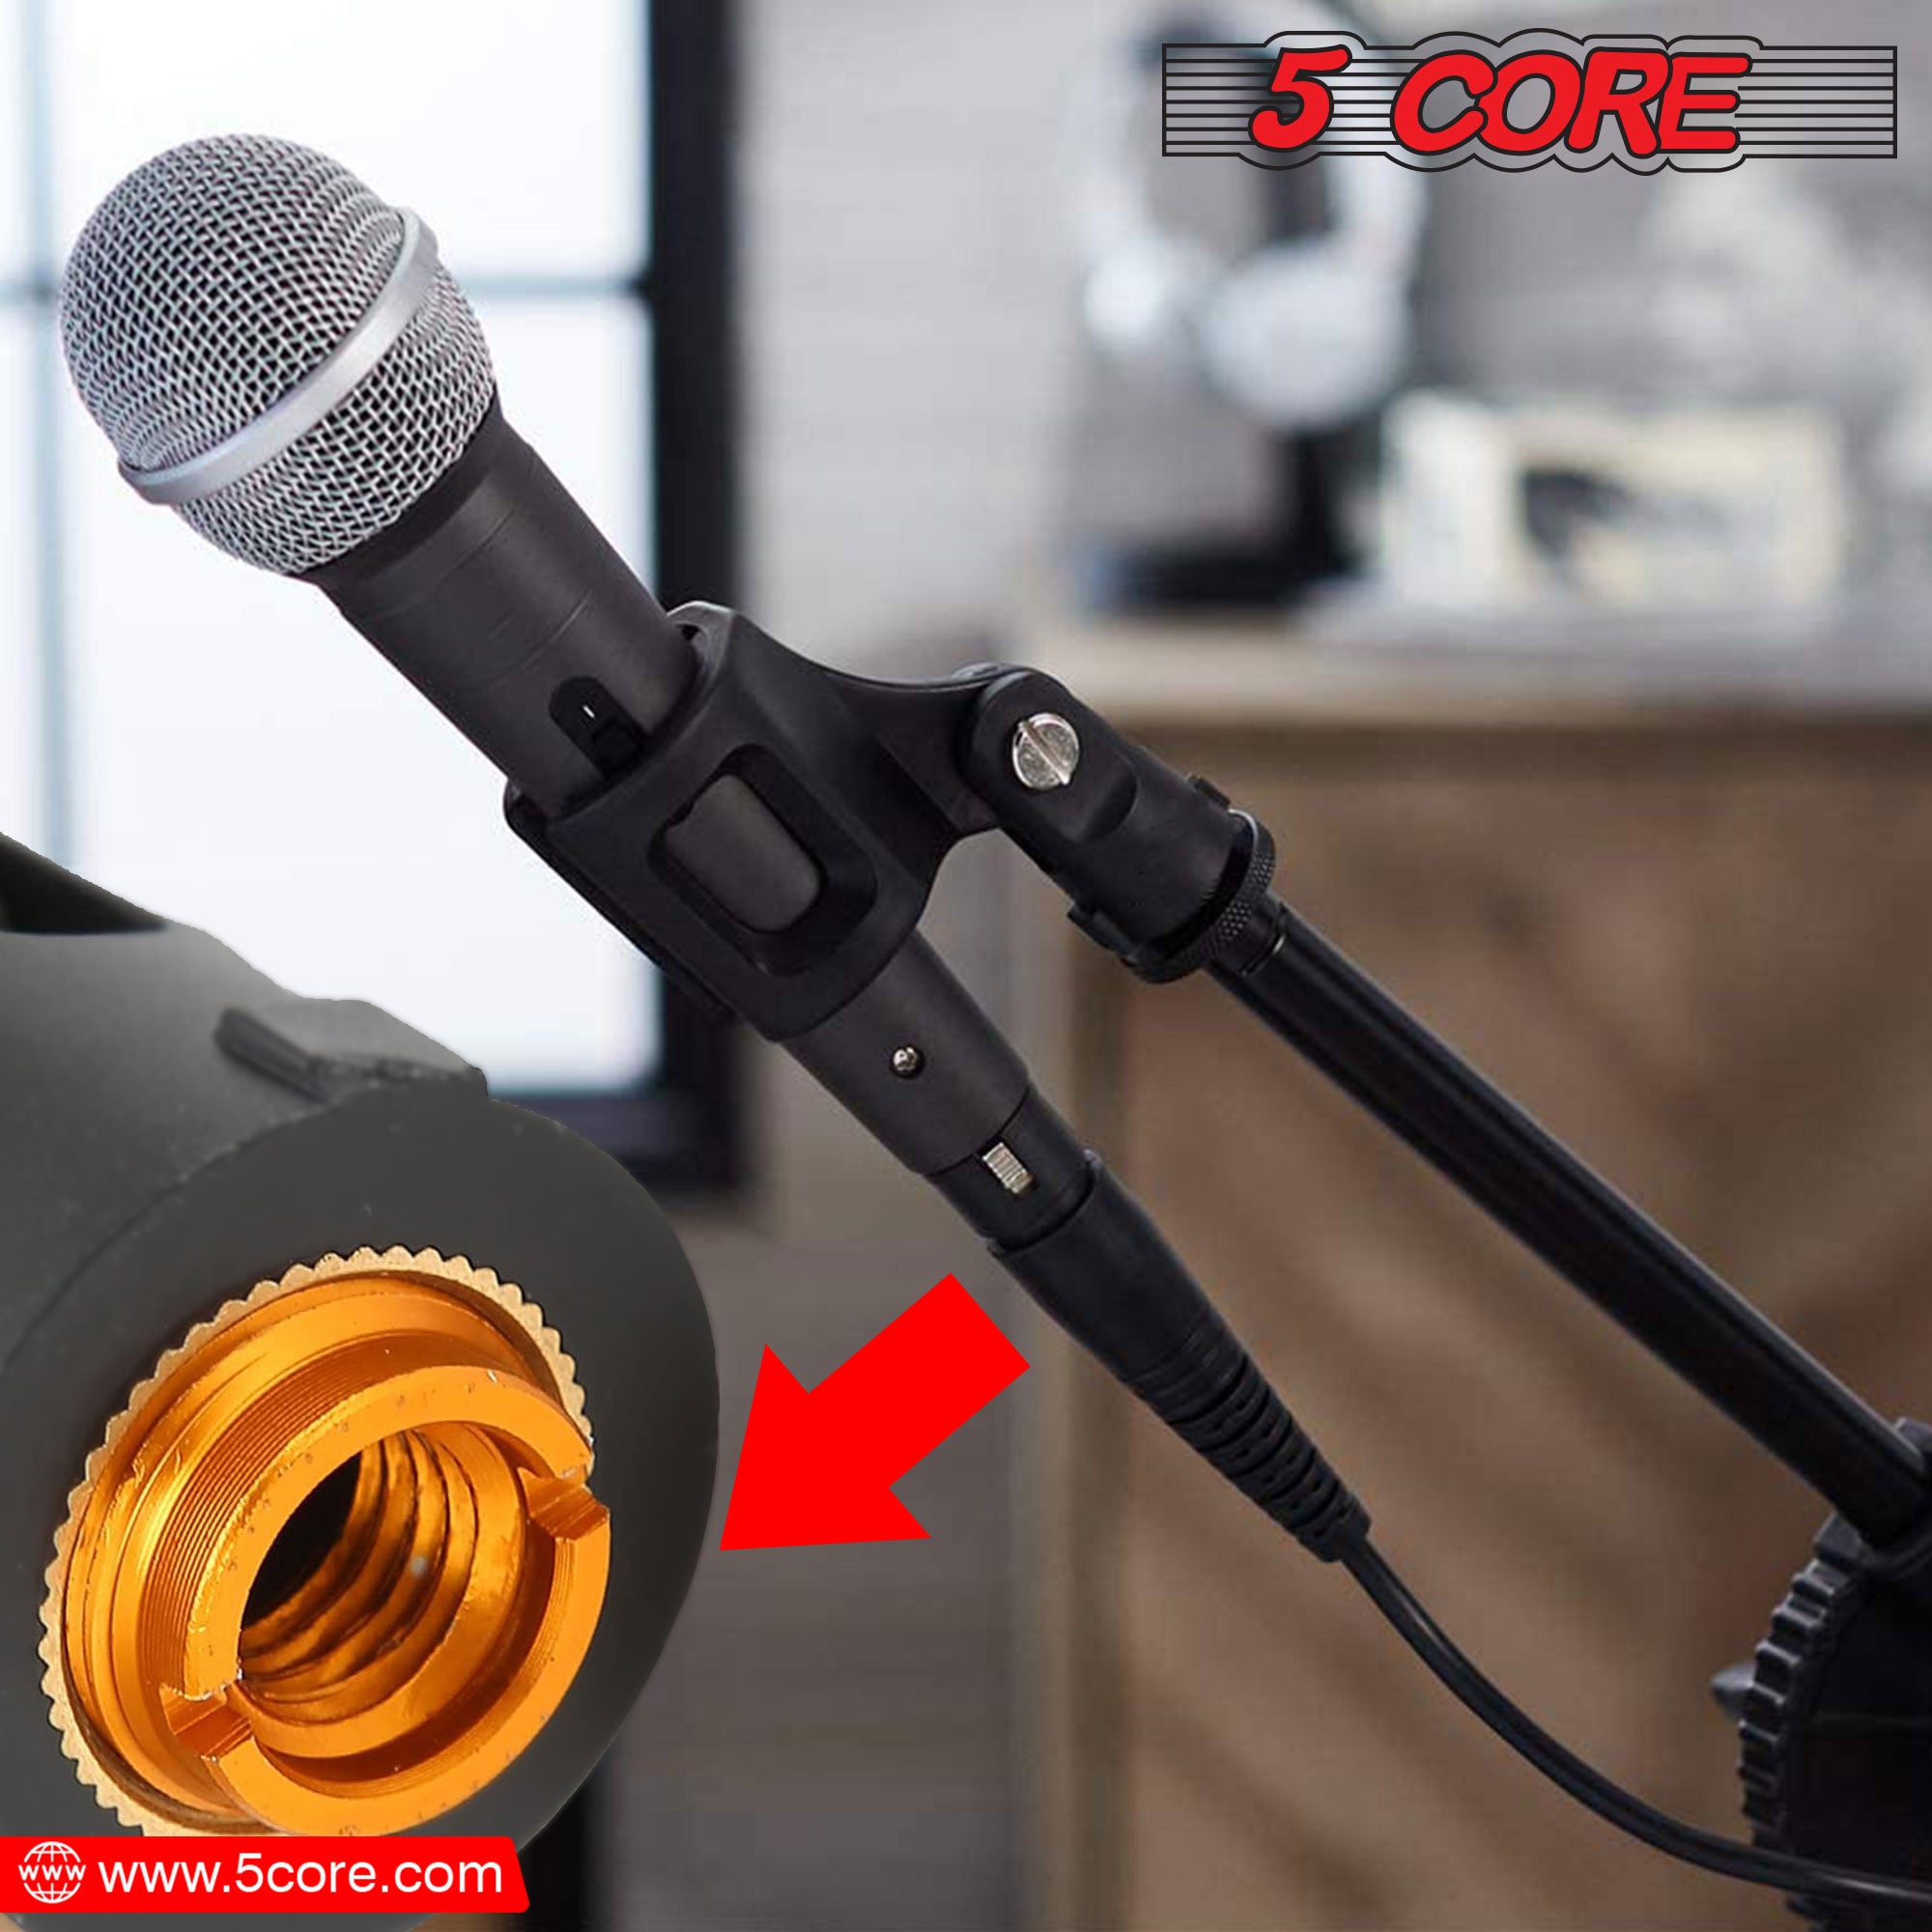 5 Core Microphone Clips Large Barrel Style Mic Holder Adjustable Angle for all Handheld Transmitters such as Sm57 Sm58 Sm86 Sm87 - MC-01 2PCS